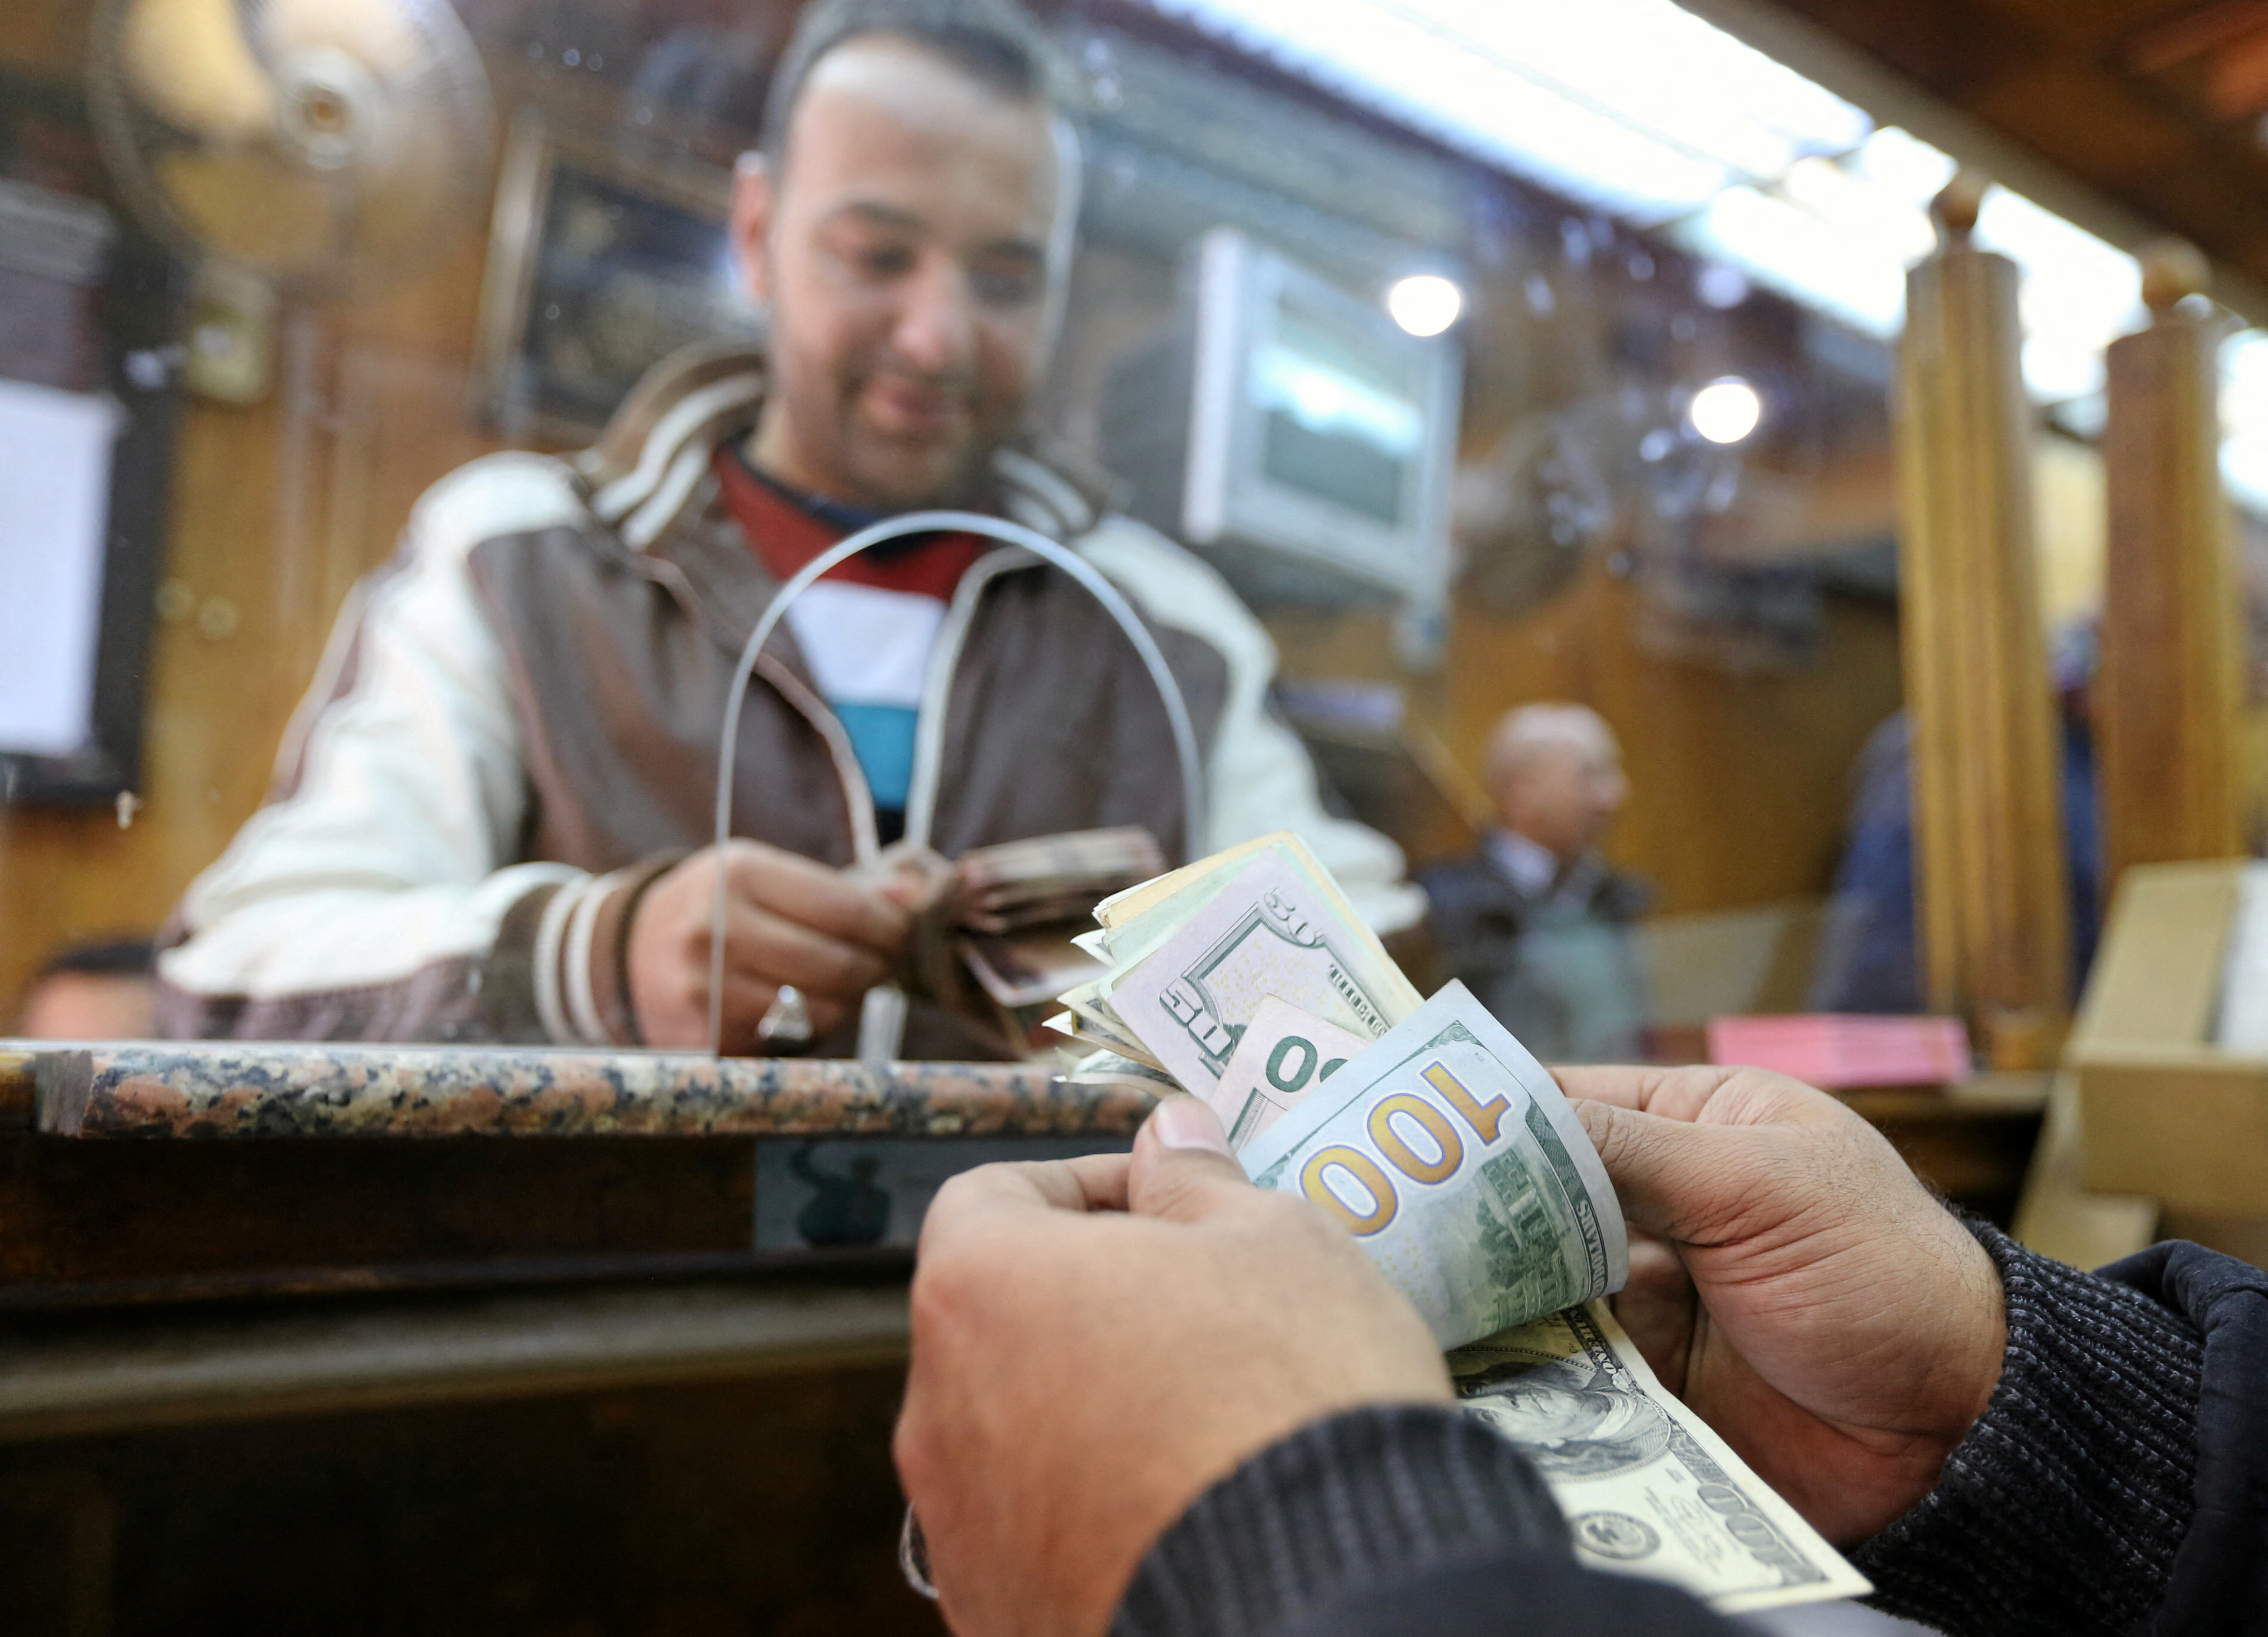 A customer exchanges U.S. dollars to Egyptian pounds in a foreign exchange office in central Cairo, Egypt December 27, 2016. REUTERS/Mohamed Abd El Ghany